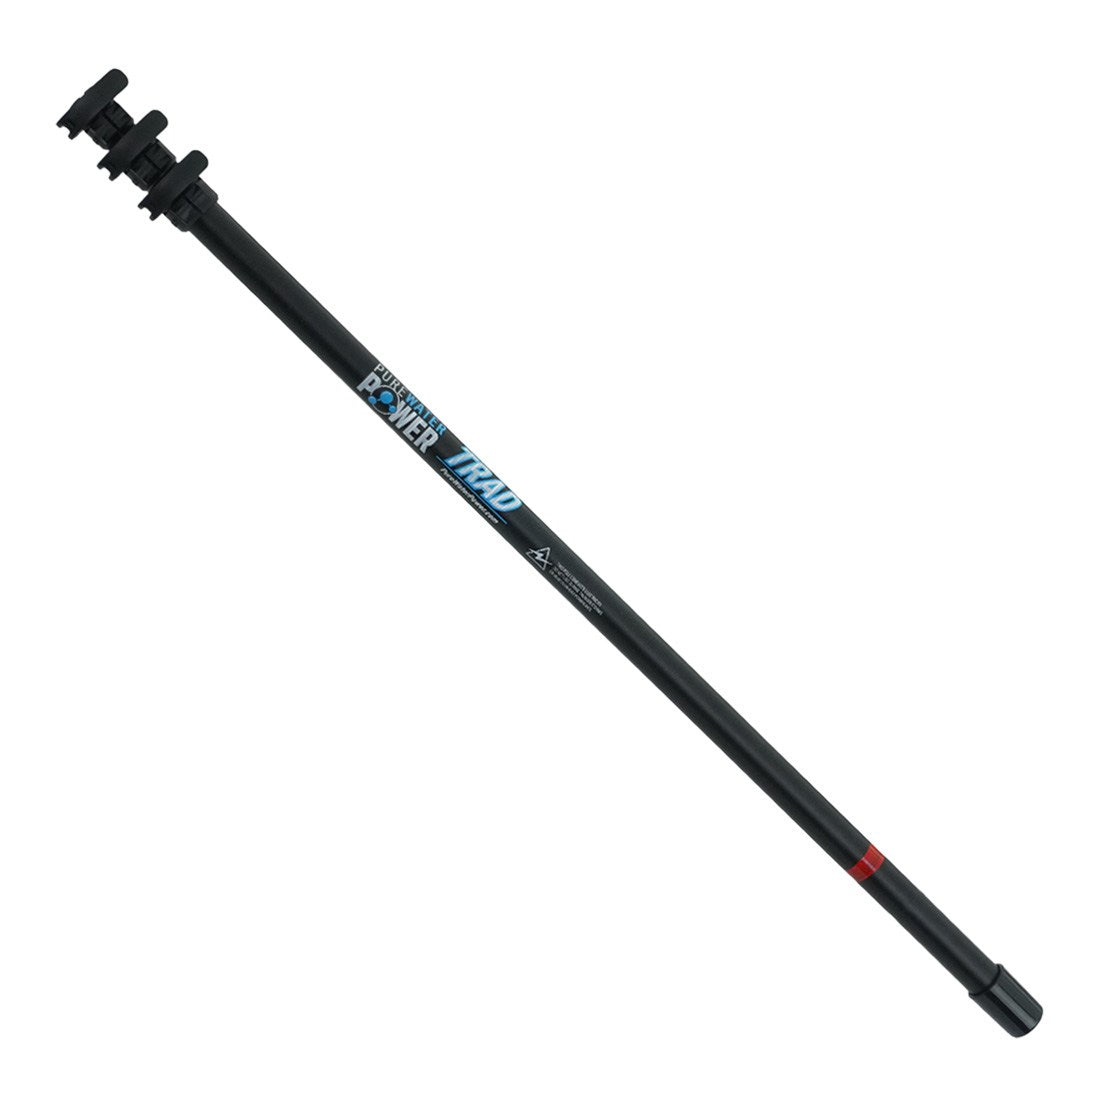 PWP Trad Pole - 7 Foot Full Viiew